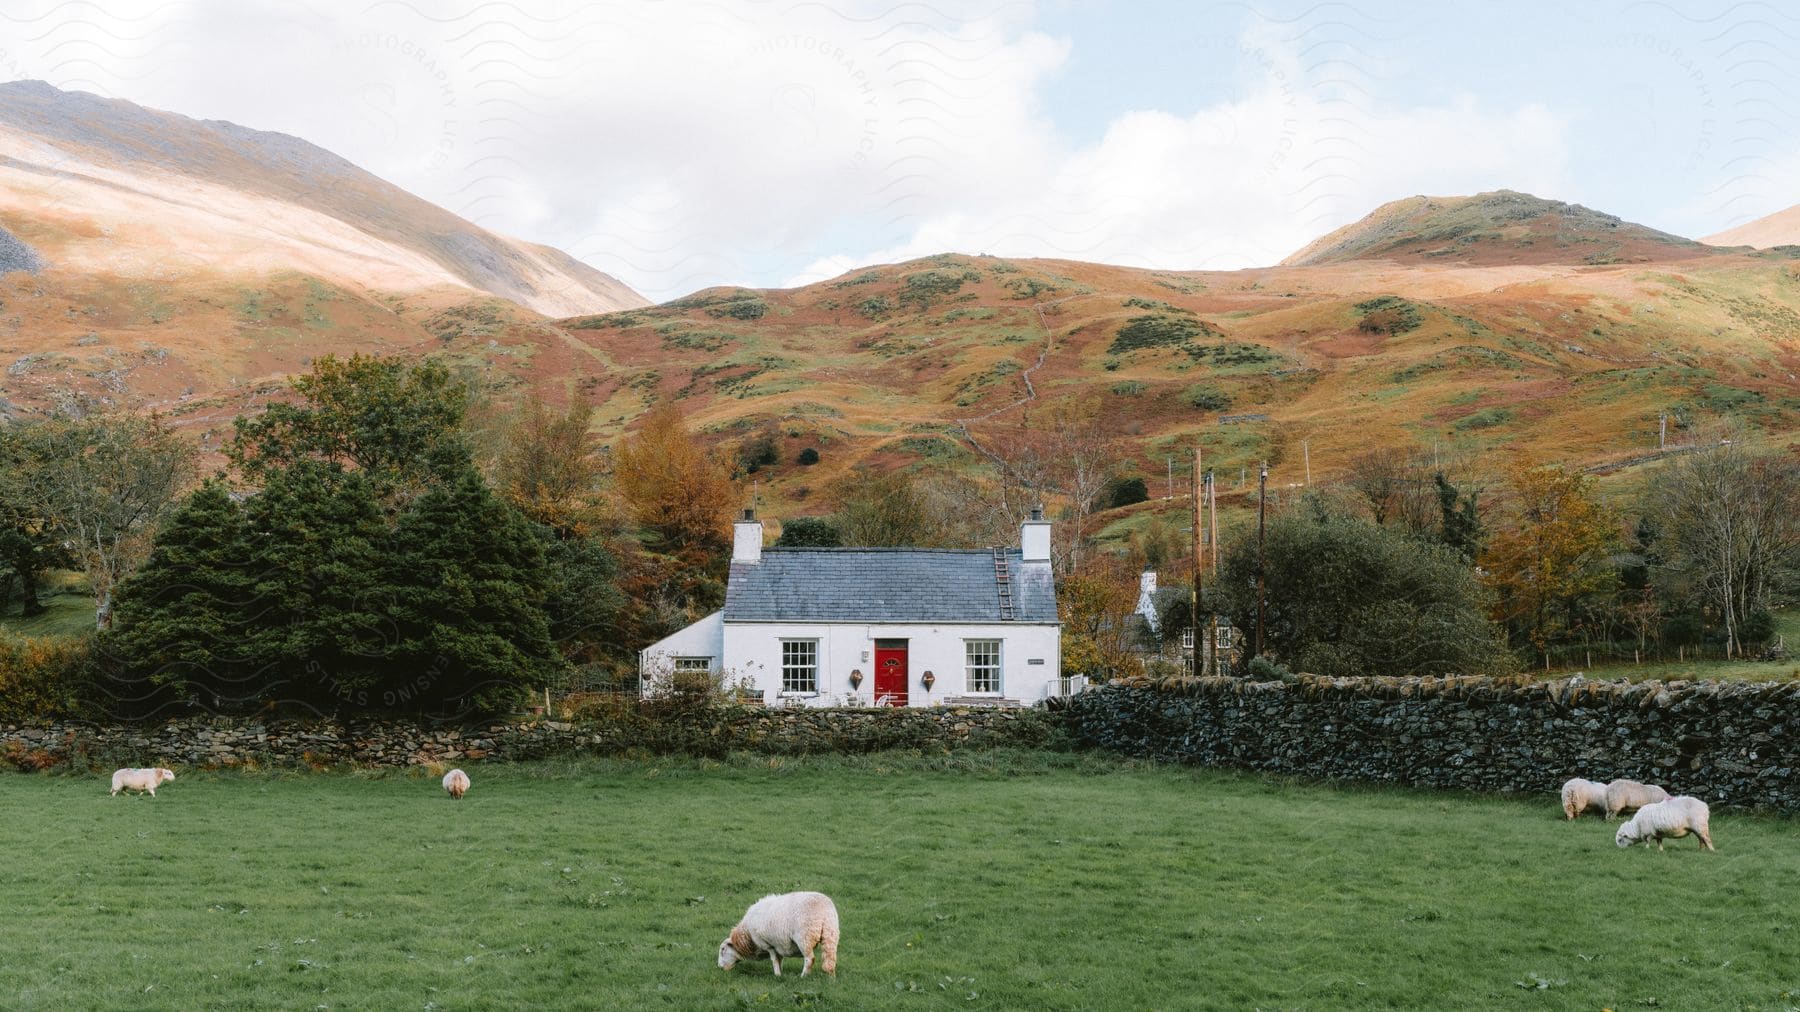 herd of sheep grazing an open green field in front of a house close to the mountain